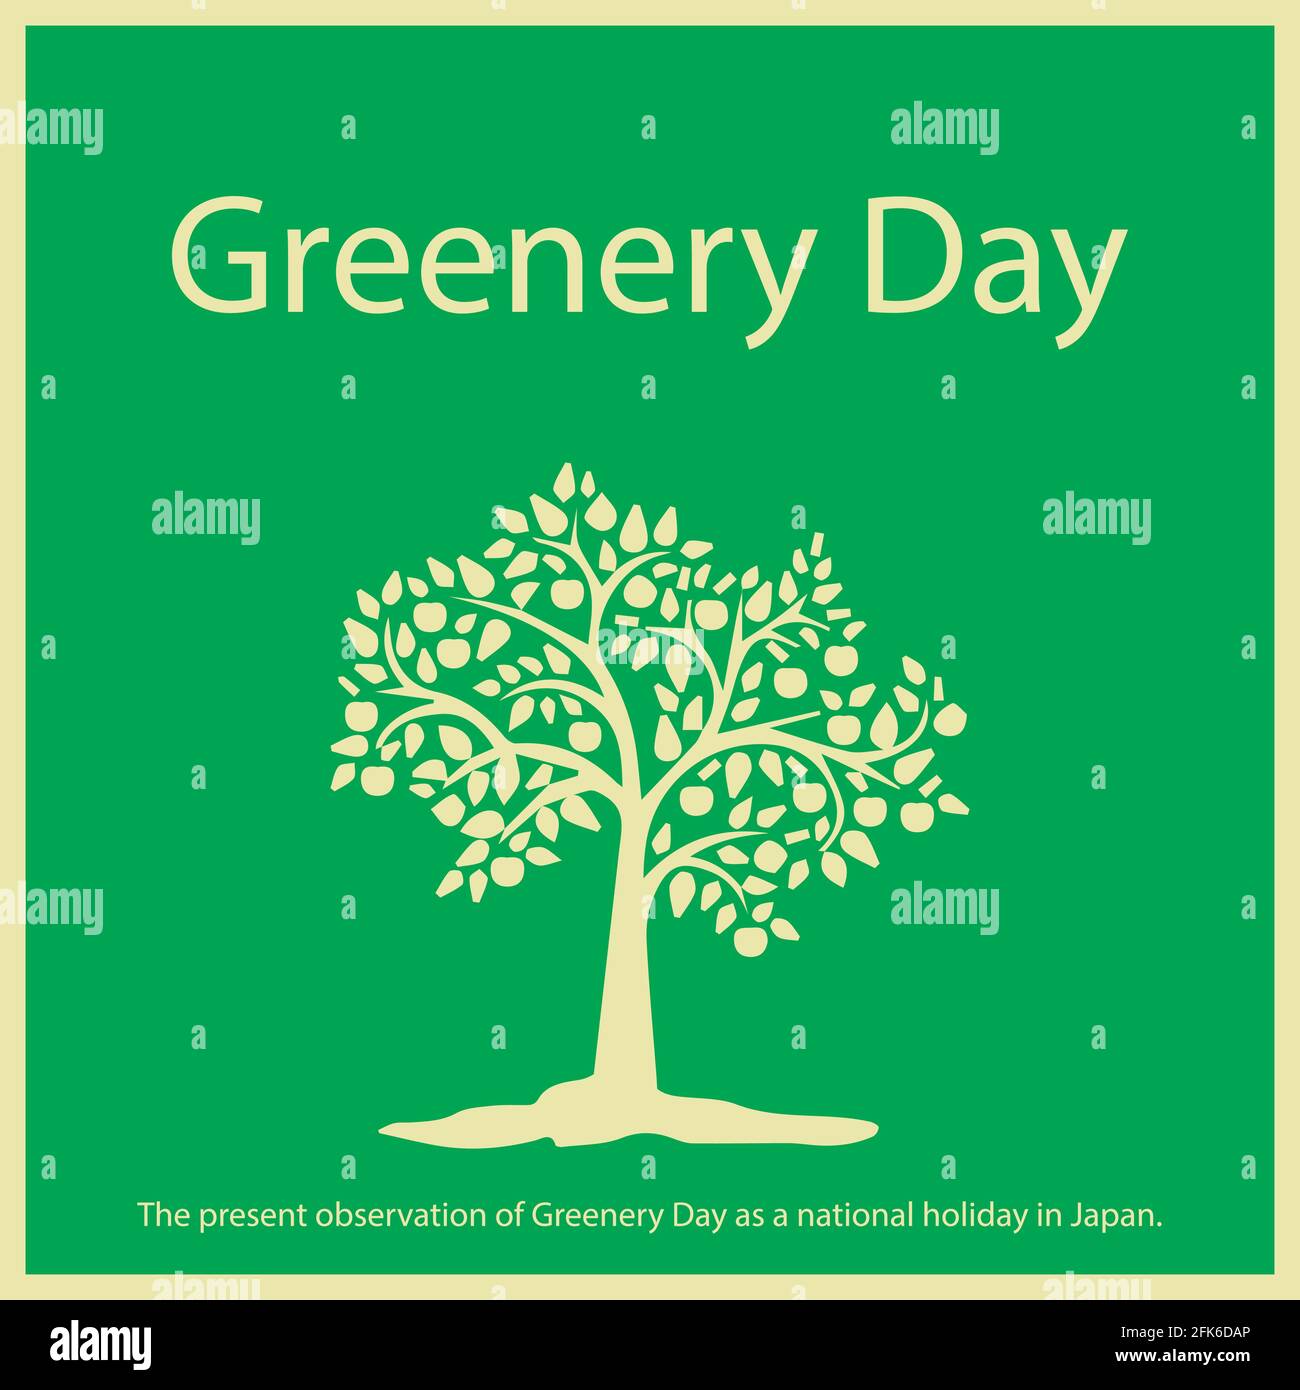 The present observation of Greenery Day as a national holiday in Japan. Stock Vector